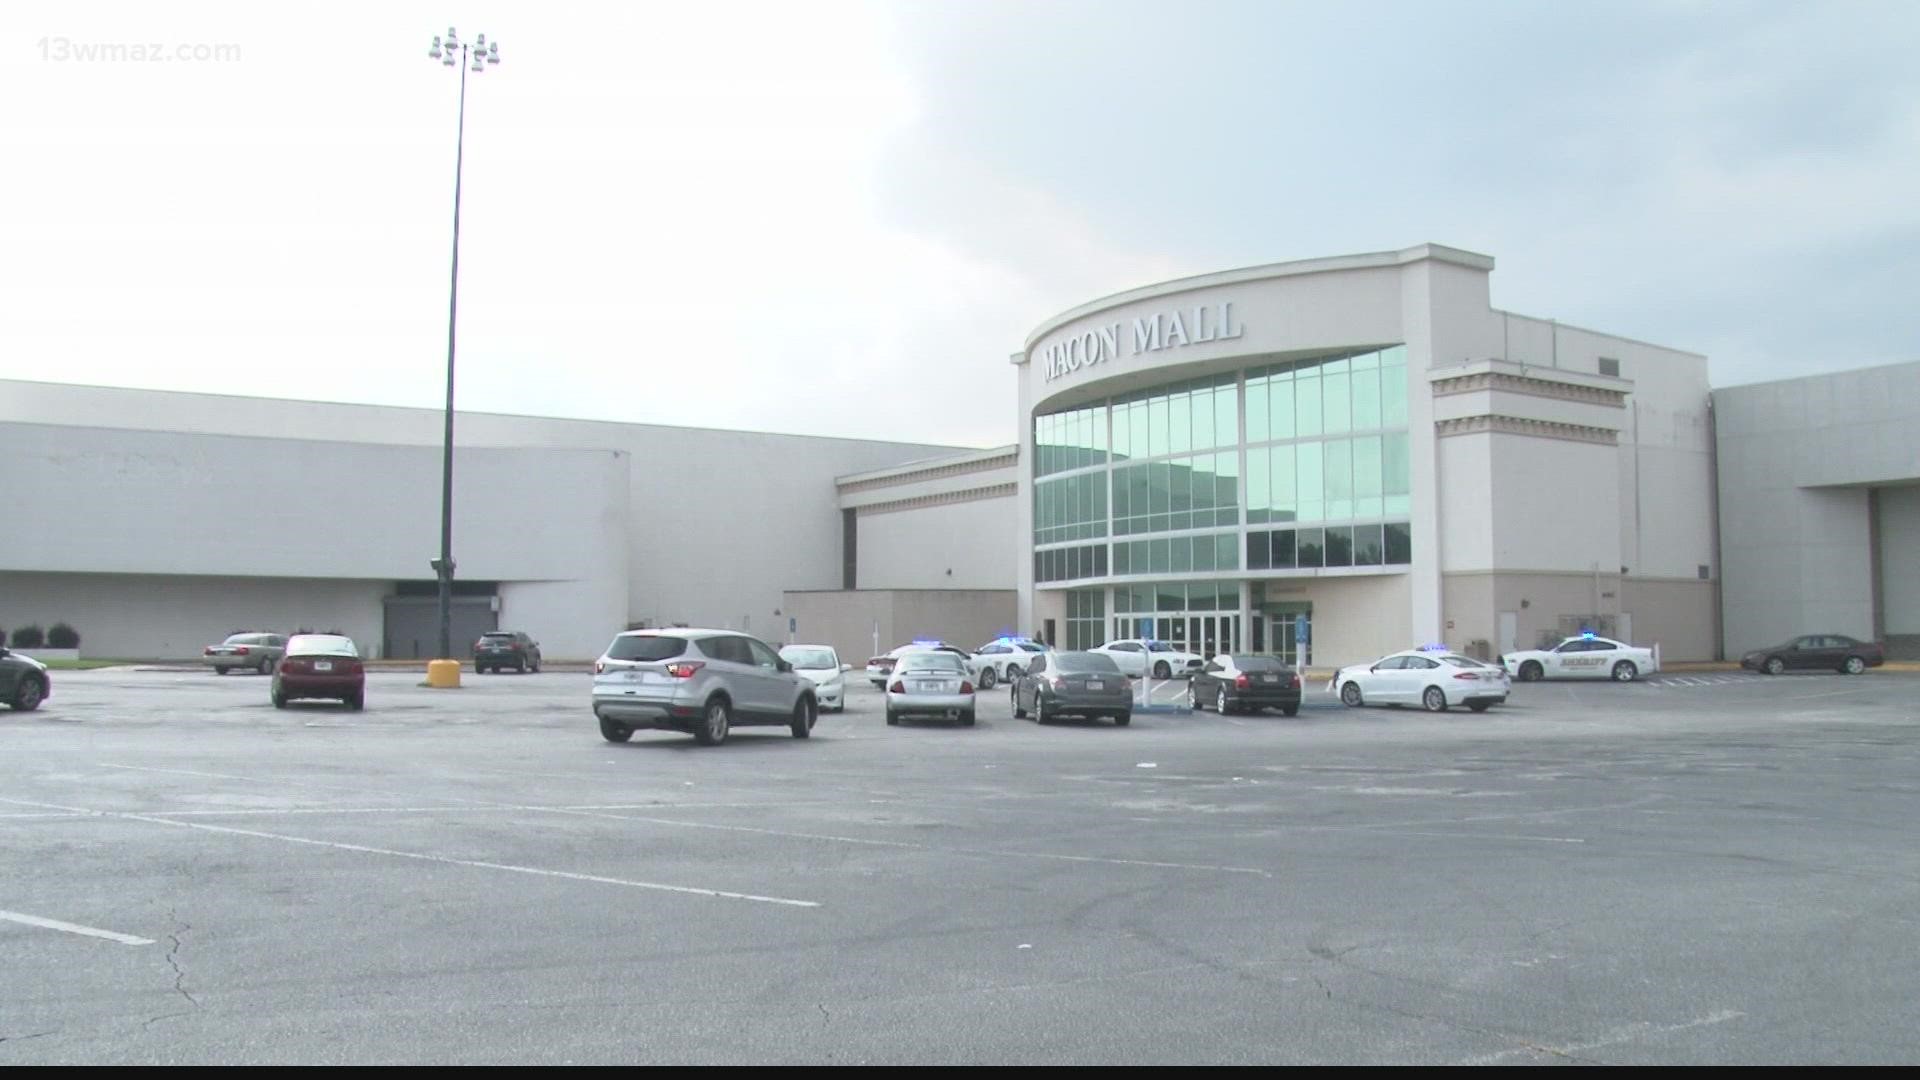 A Macon teen is dead after being shot twice in the chest at the Macon Mall food court.